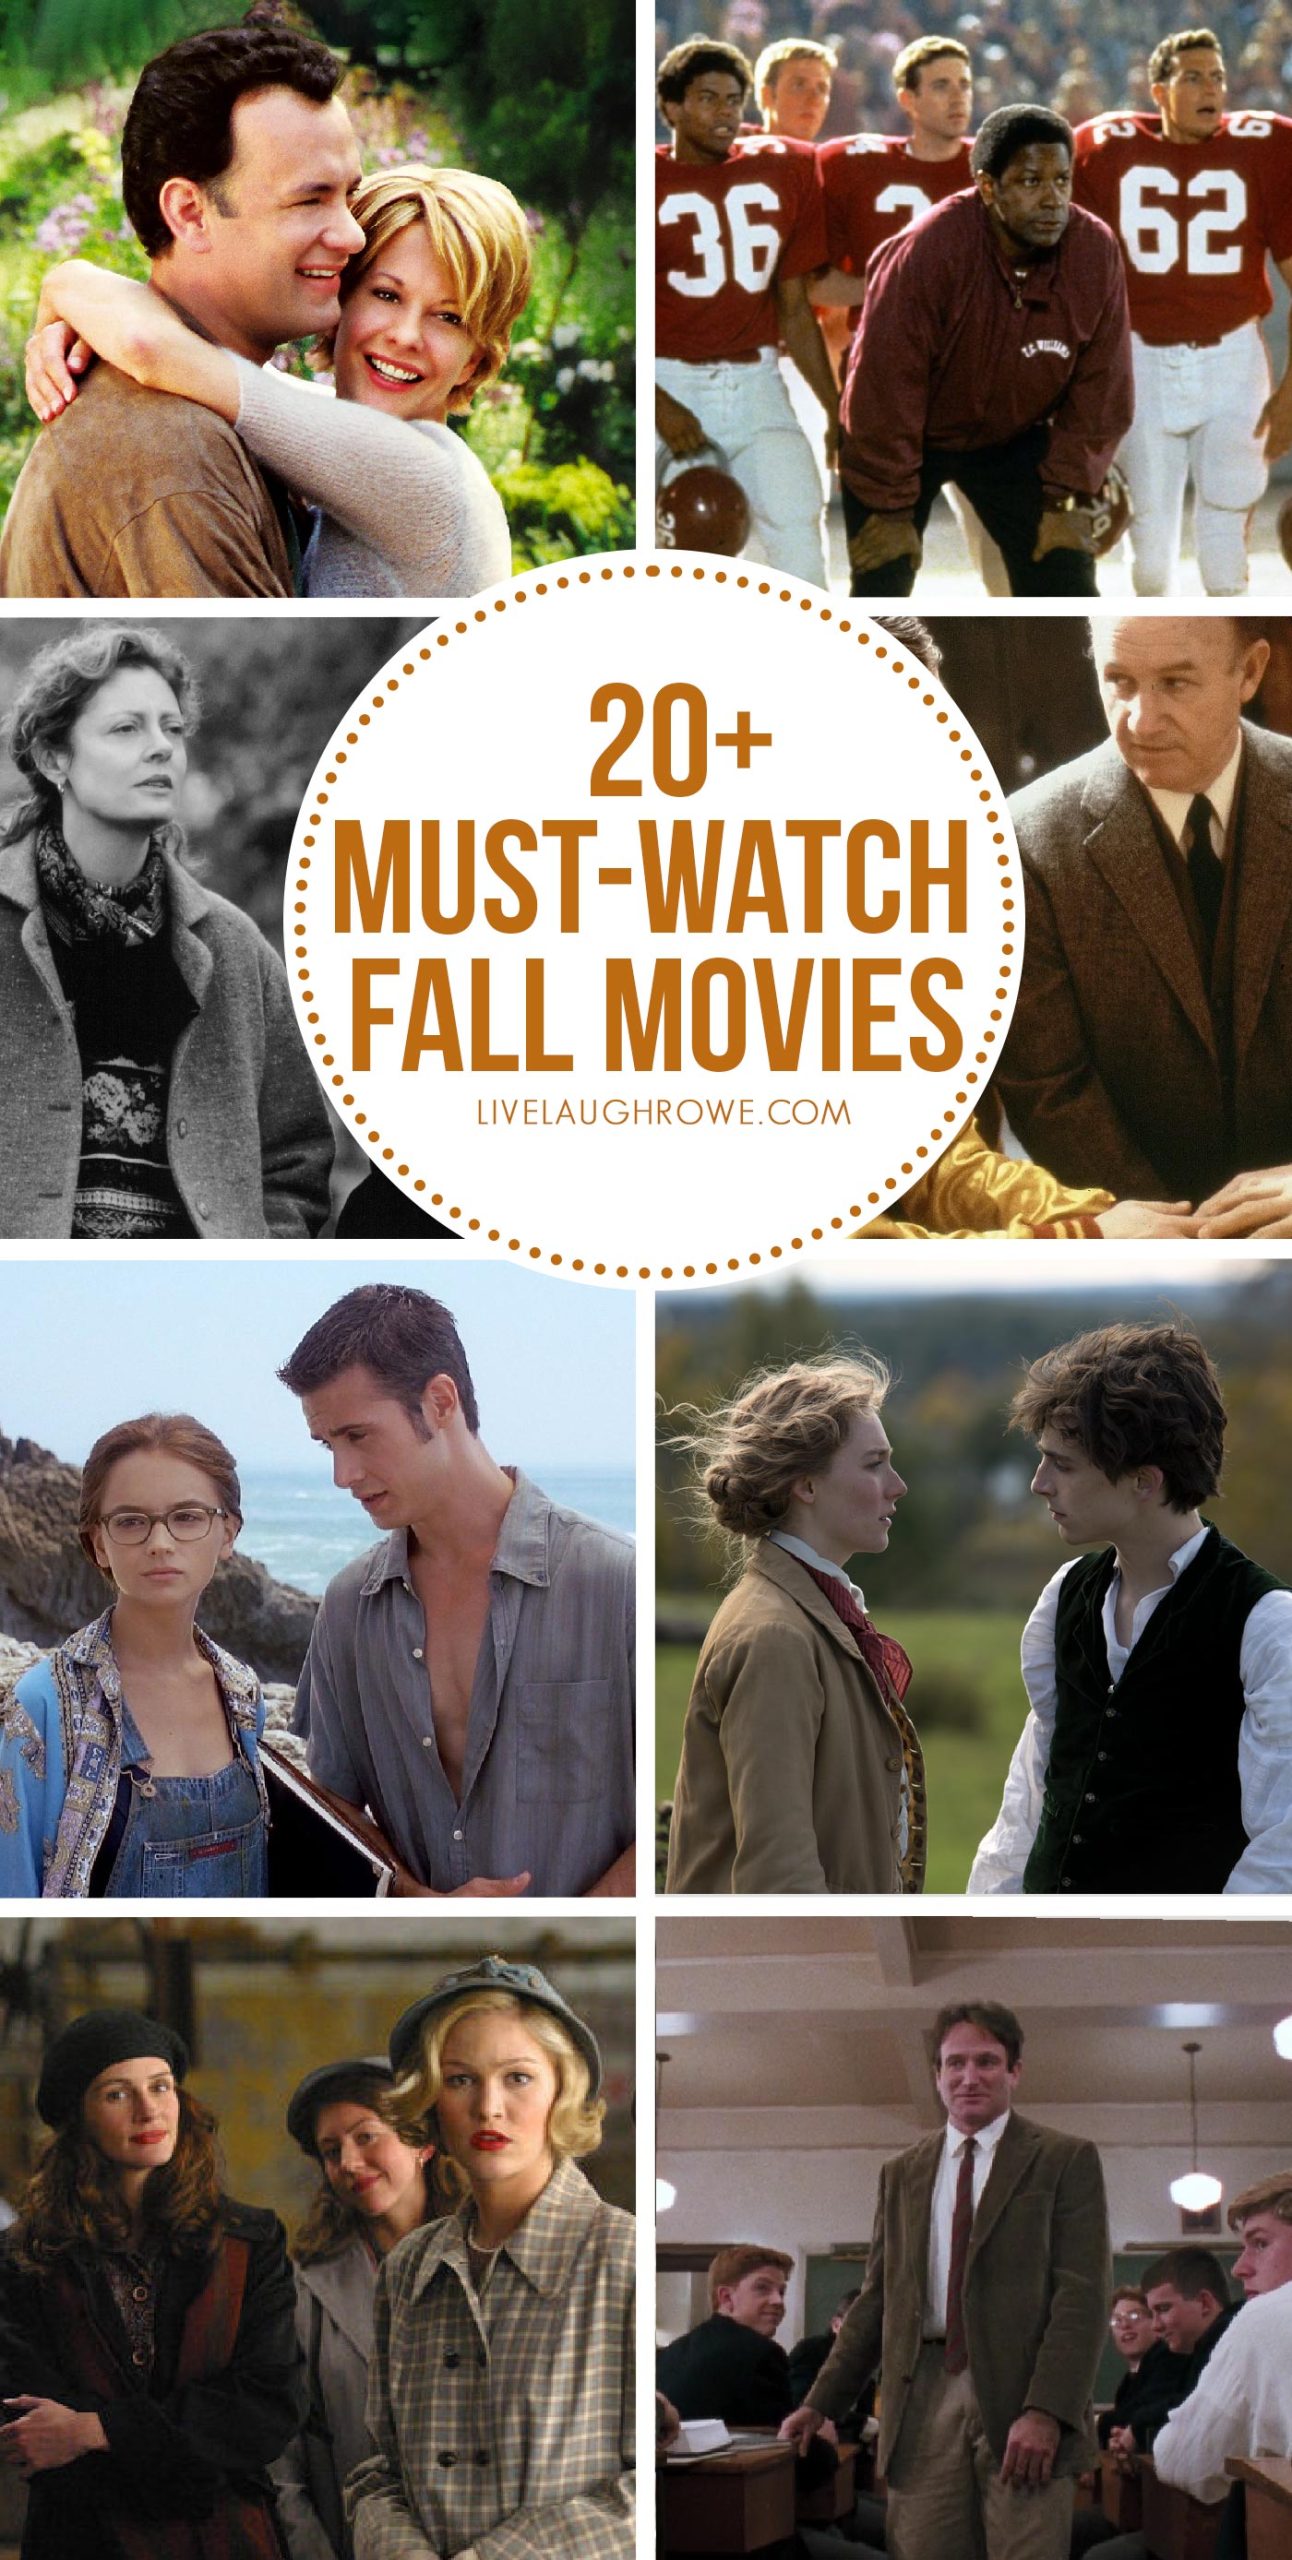 must-watch fall movies collage